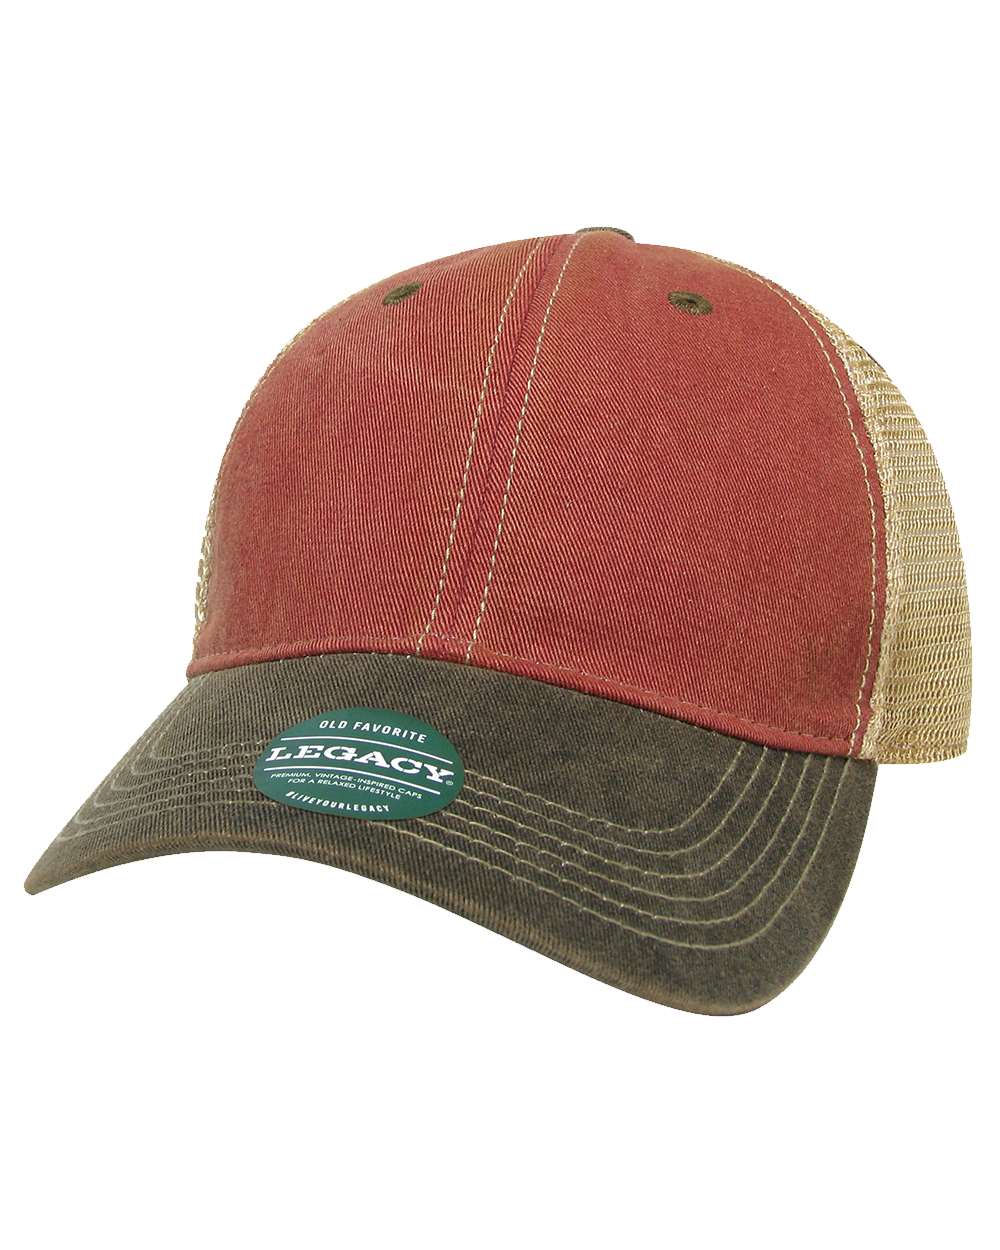 Front view of LEGACY OFA custom hat in cardinal, black and khaki